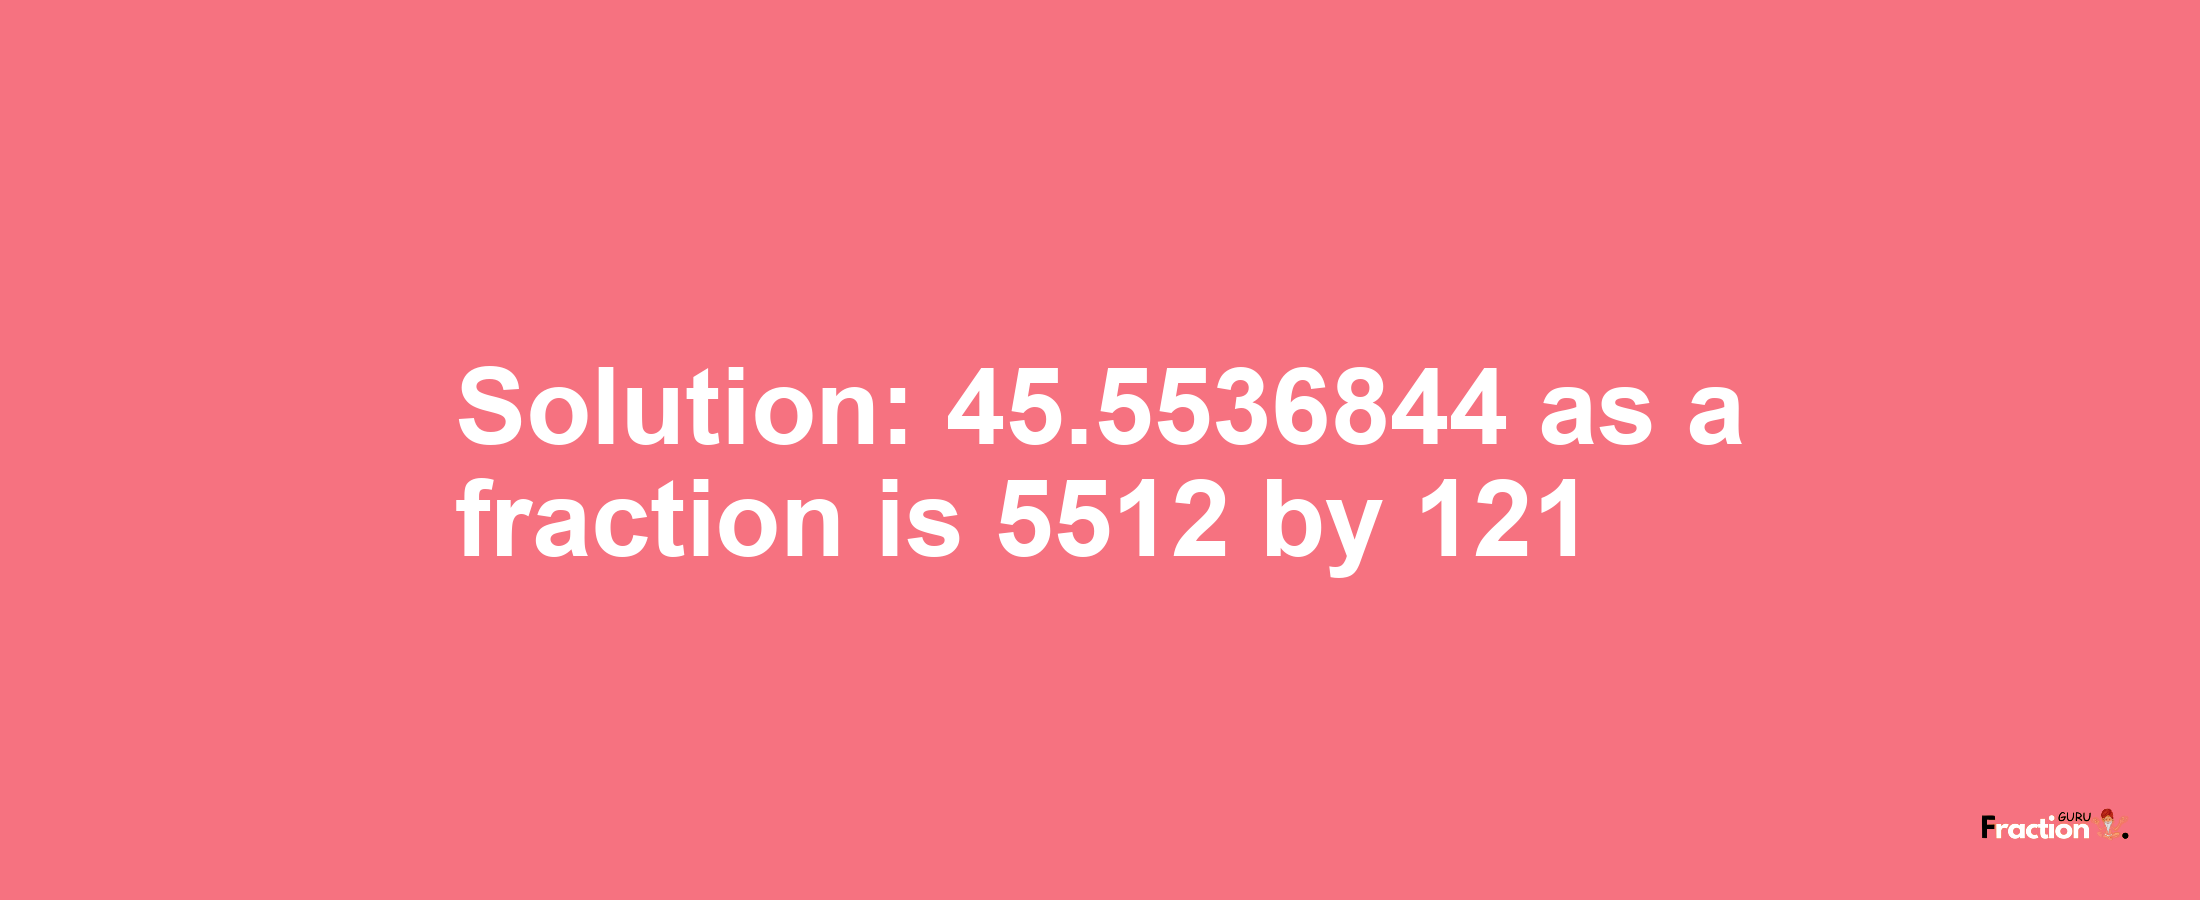 Solution:45.5536844 as a fraction is 5512/121